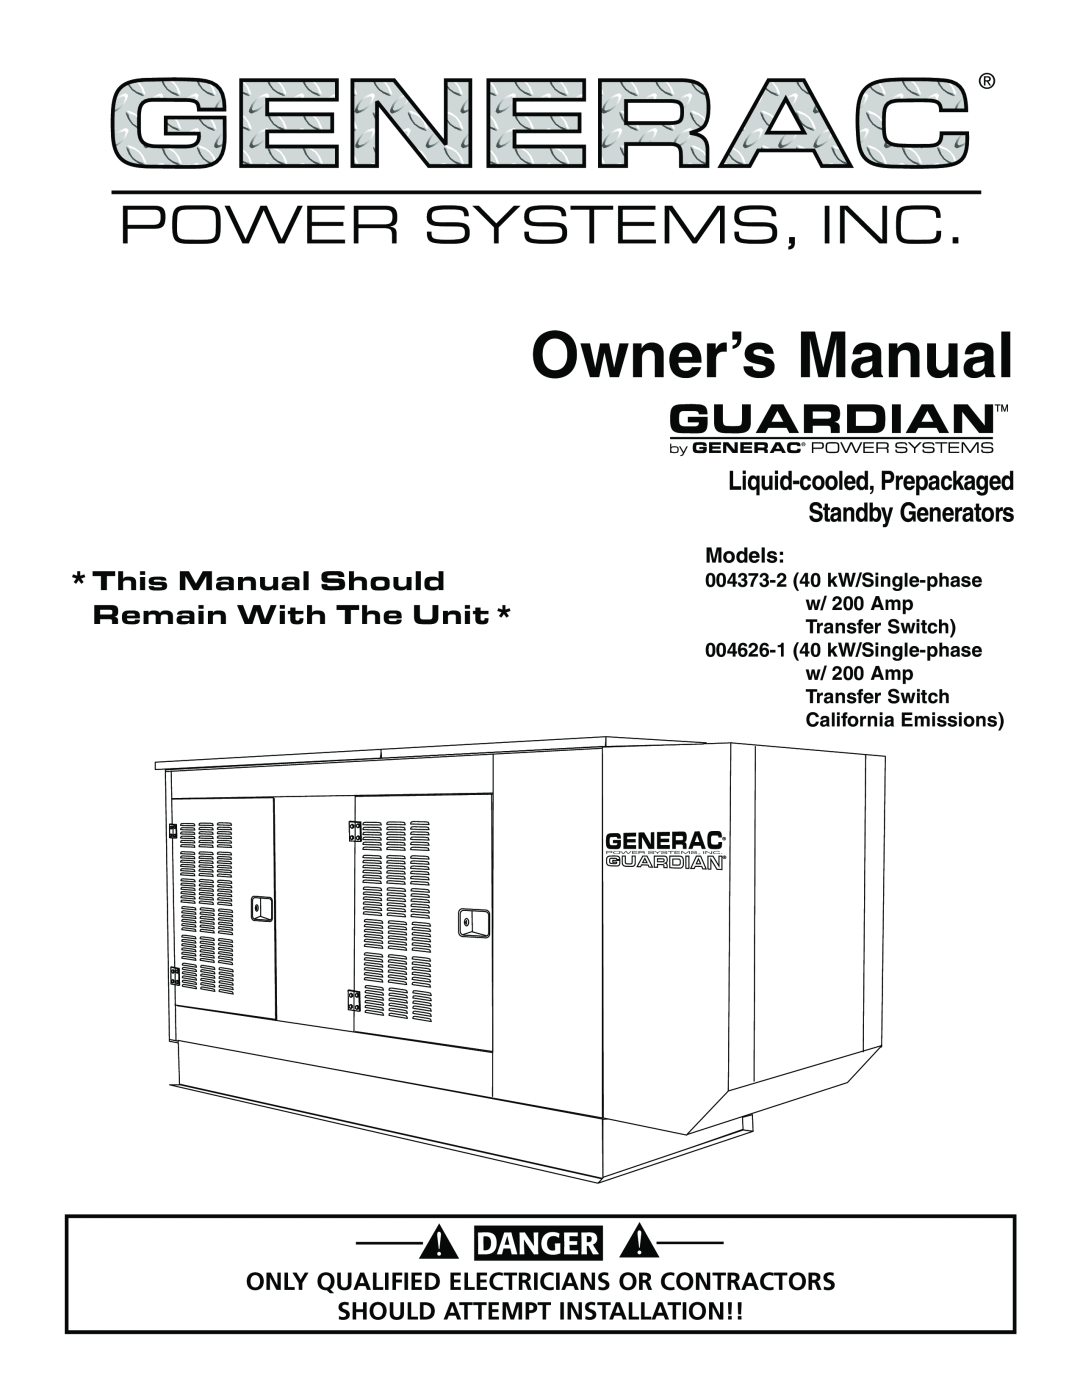 Generac 004626-1, 004373-2 owner manual Liquid-cooled, Prepackaged Standby Generators, Owner’s Manual, Power Systems, Inc 